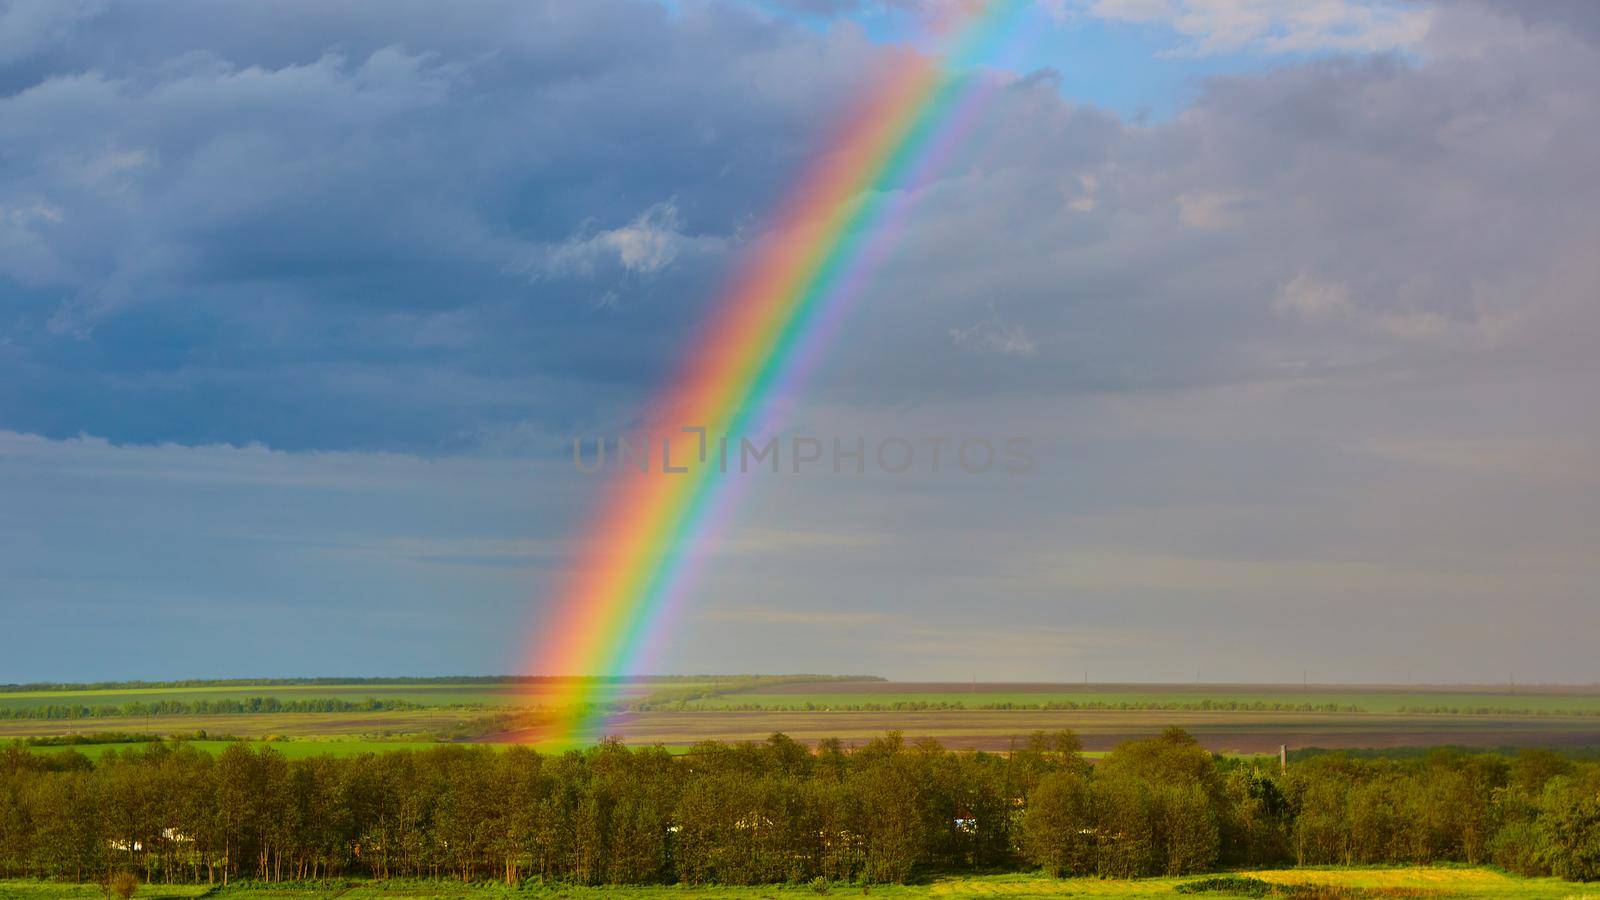 Rainbow over a field after thunderstorm.